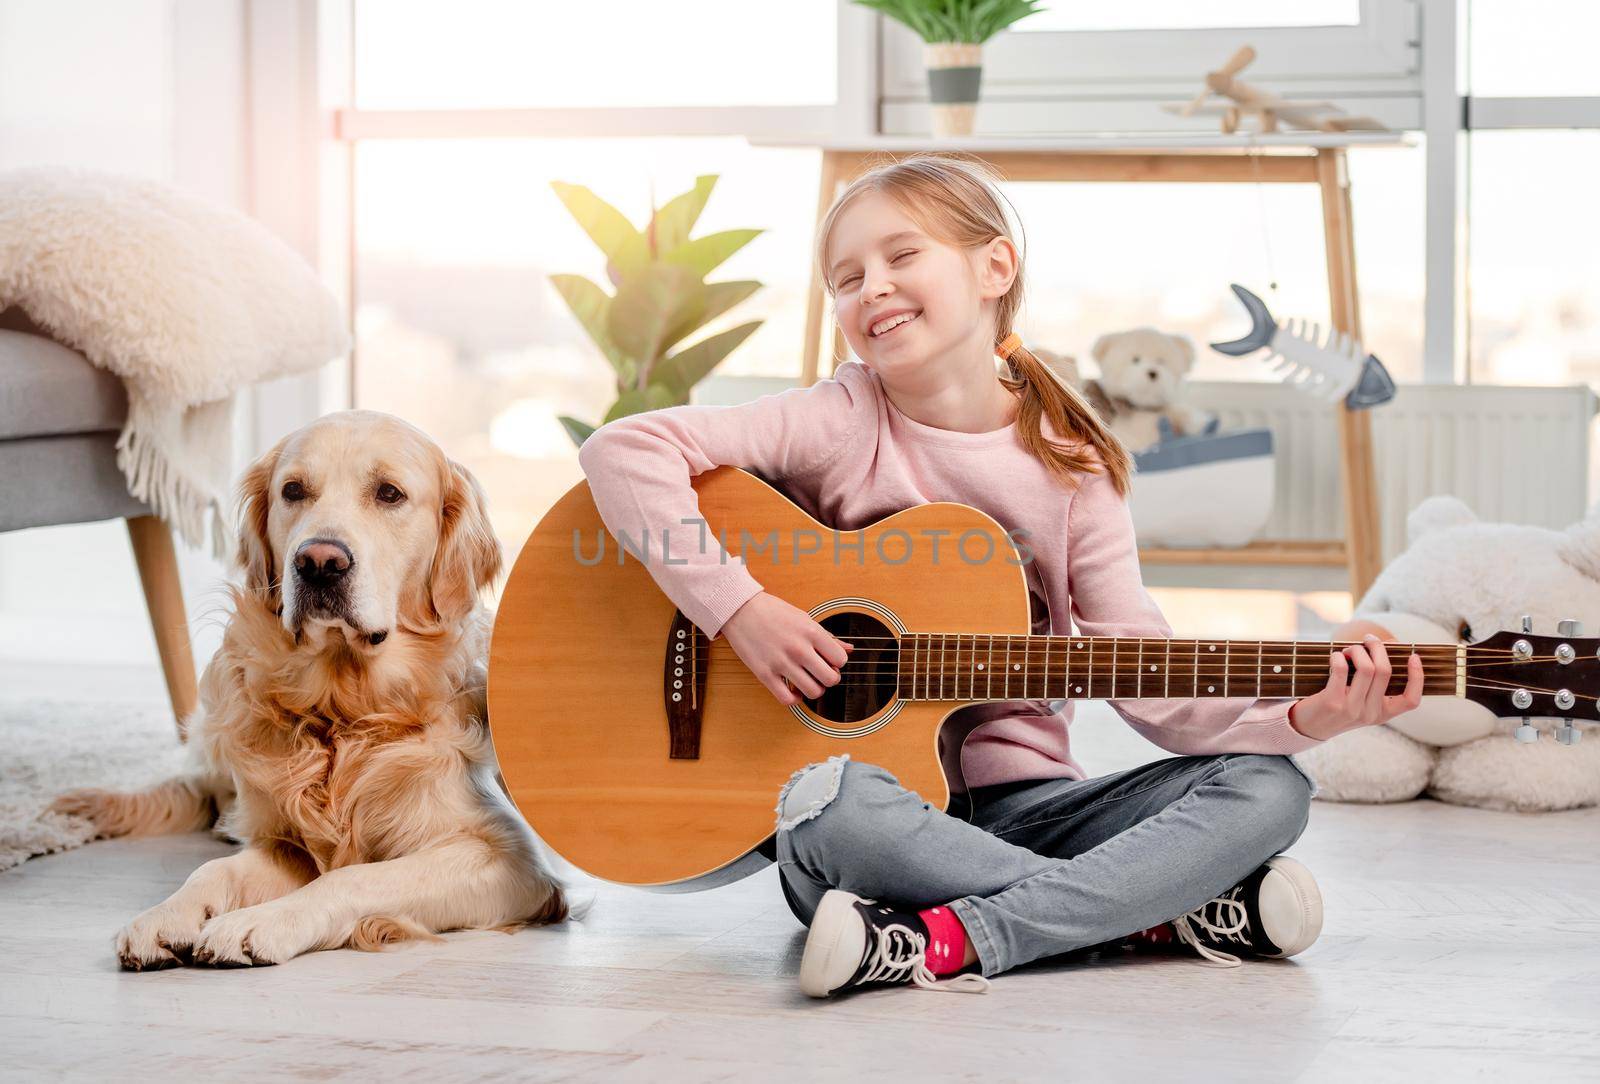 Little girl sitting on the floor and playing guitar with golden retriever dog lying next to her